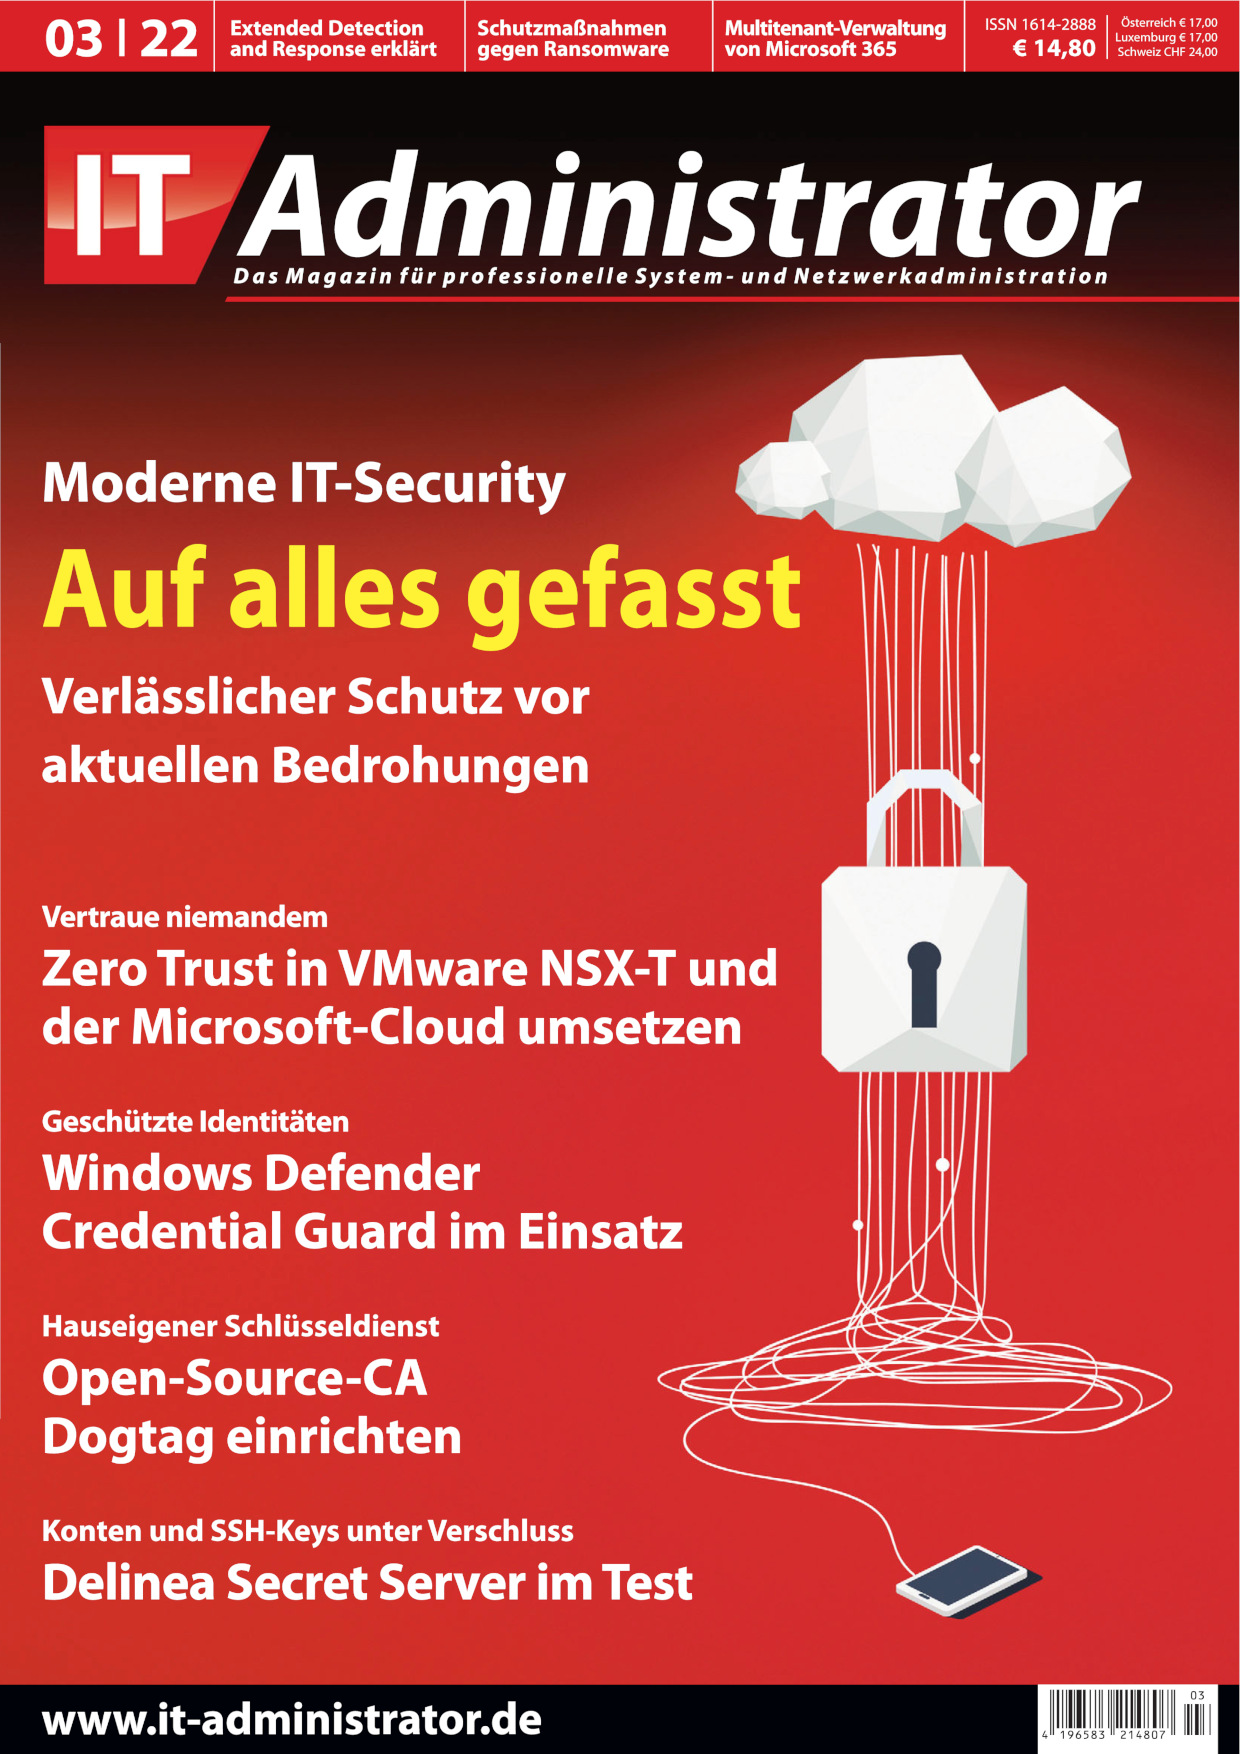 Moderne IT-Security